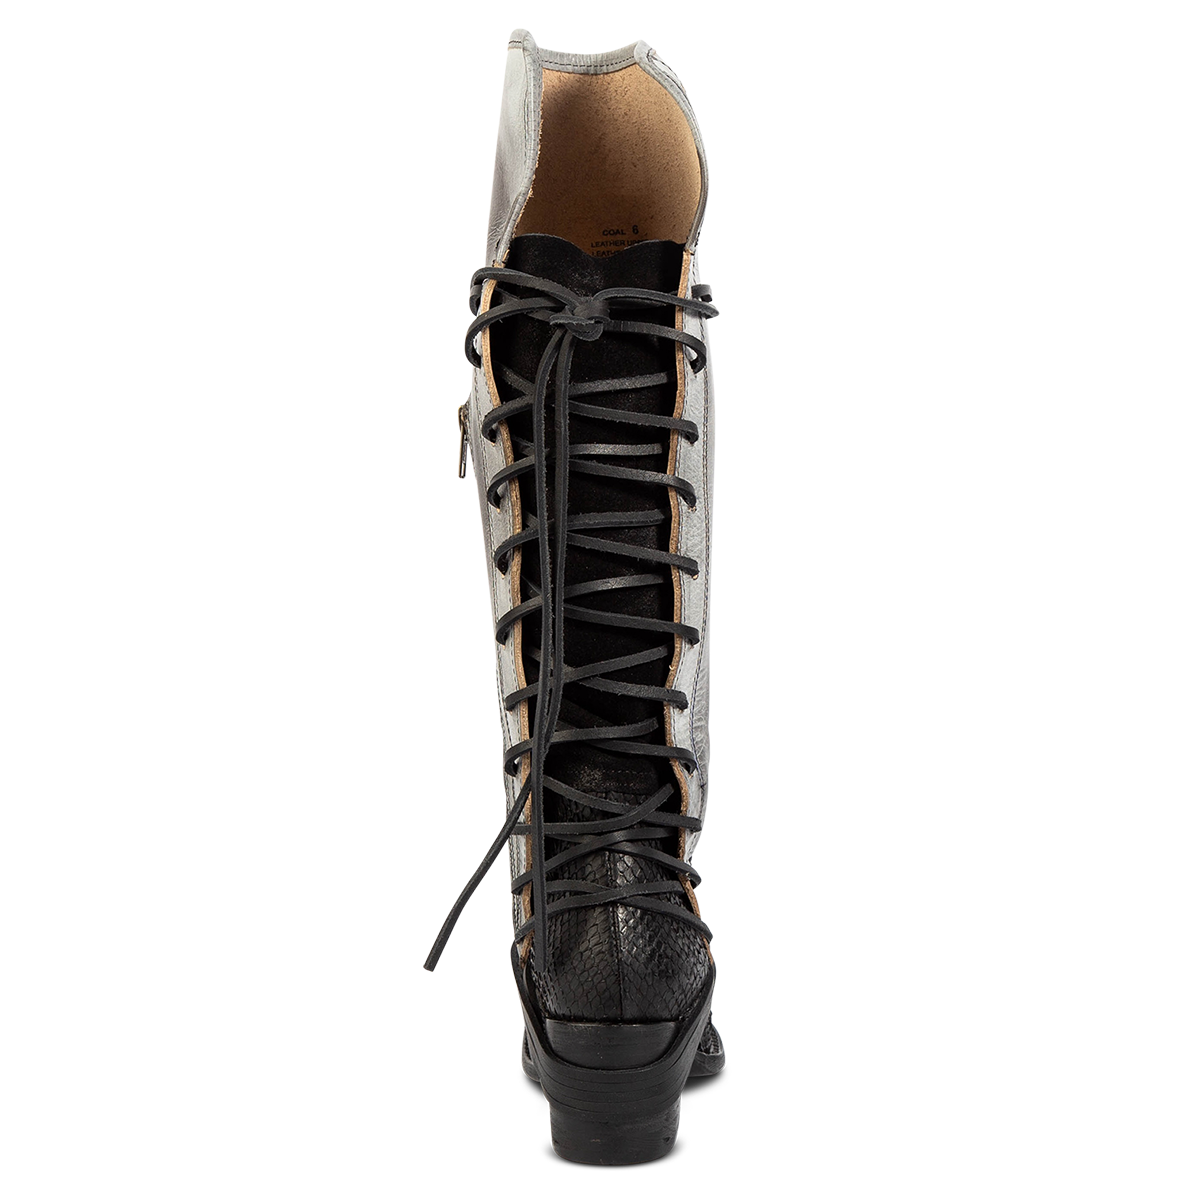 Back view showing expandable panel with adjustable leather lacing on FREEBIRD women's Coal black python leather tall boot